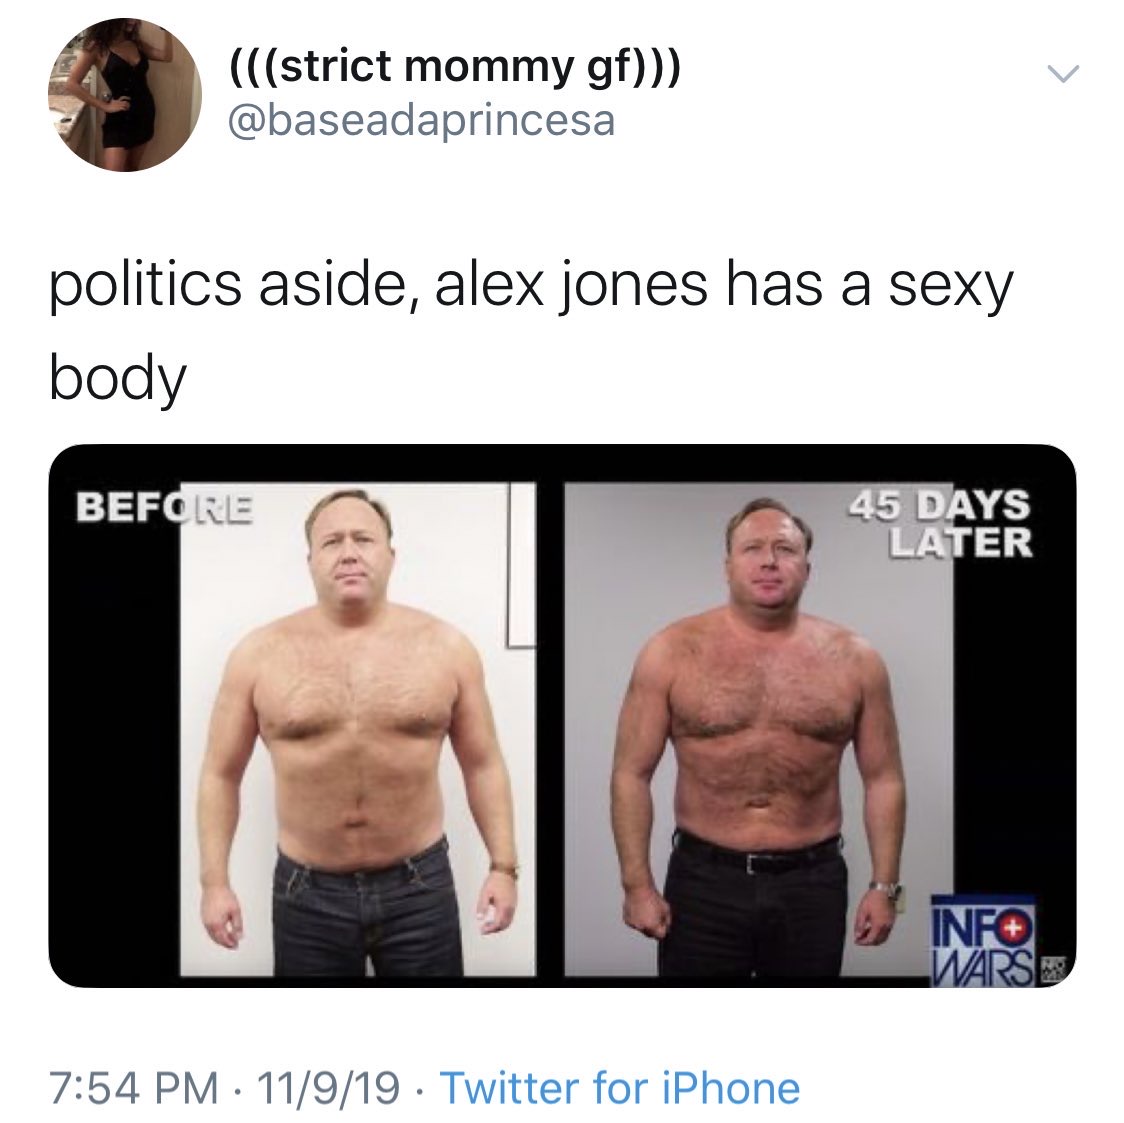 alex jones before after - strict mommy gf politics aside, alex jones has a sexy body Before 45 Days Later Inf Wars 11919. Twitter for iPhone